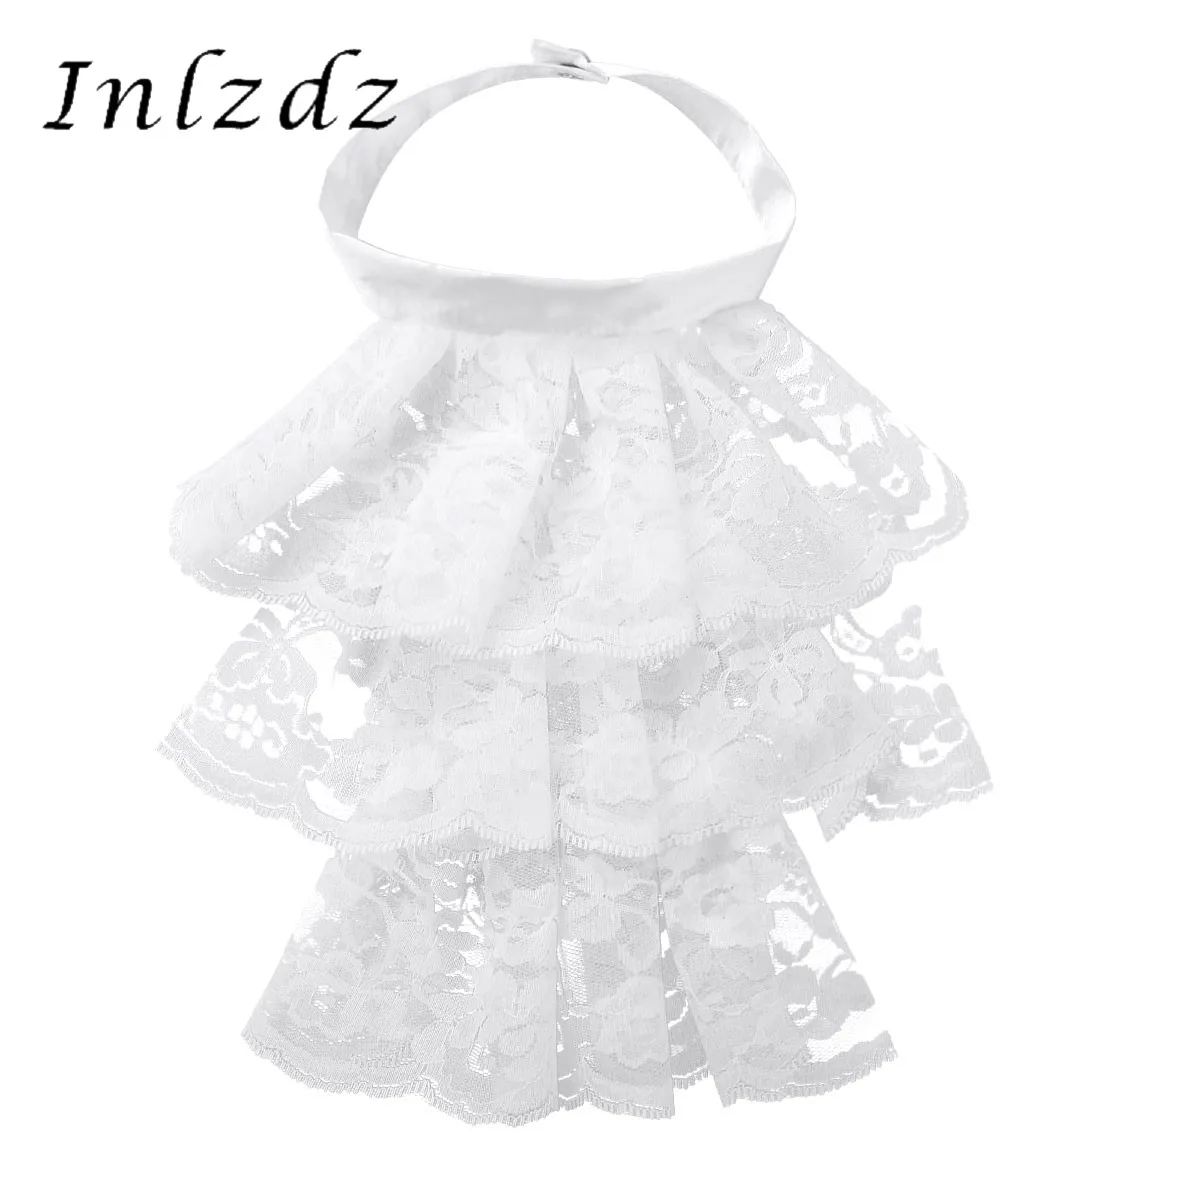 

Womens Mens Ruffled Lace Jabot Neck Collar Victorian Renaissance Detachable Stage Party Steampunk Clubwear Costume Accessory